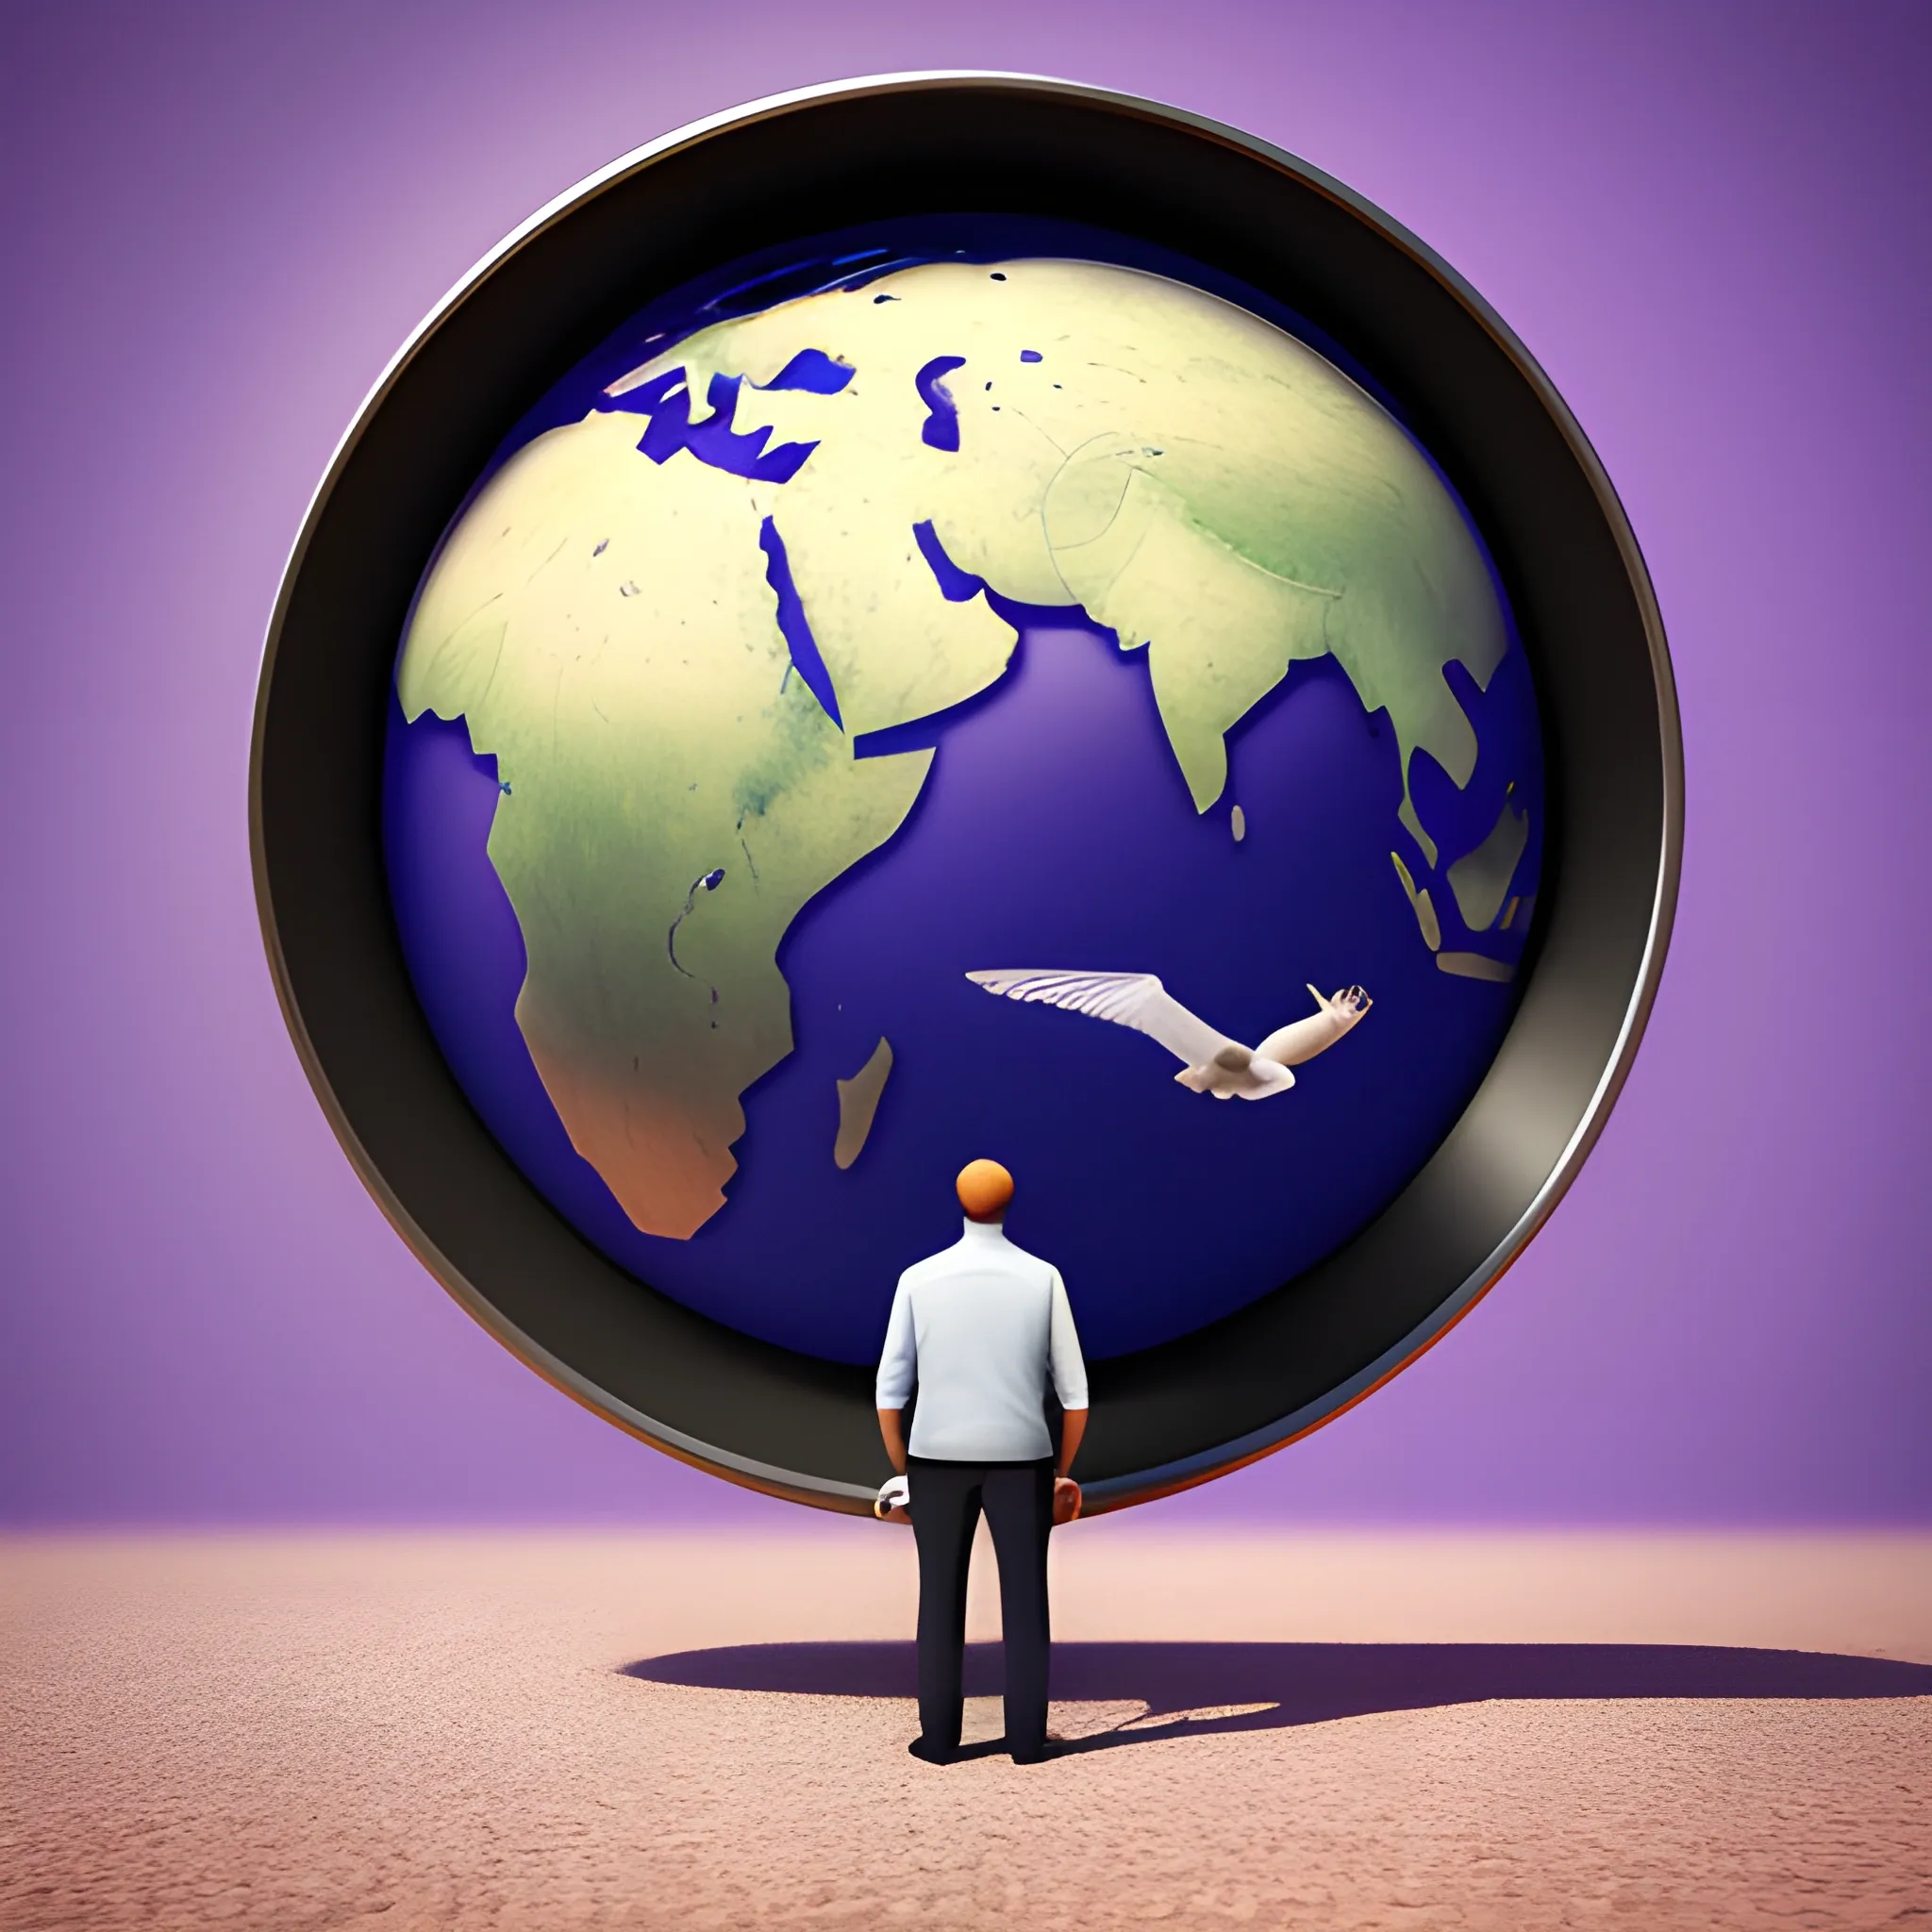 planet earth in a flat view, a man with a suitcase is standing on it, with a restrained look, birds are flying above him, all this is depicted on a purple restrained background , 3D